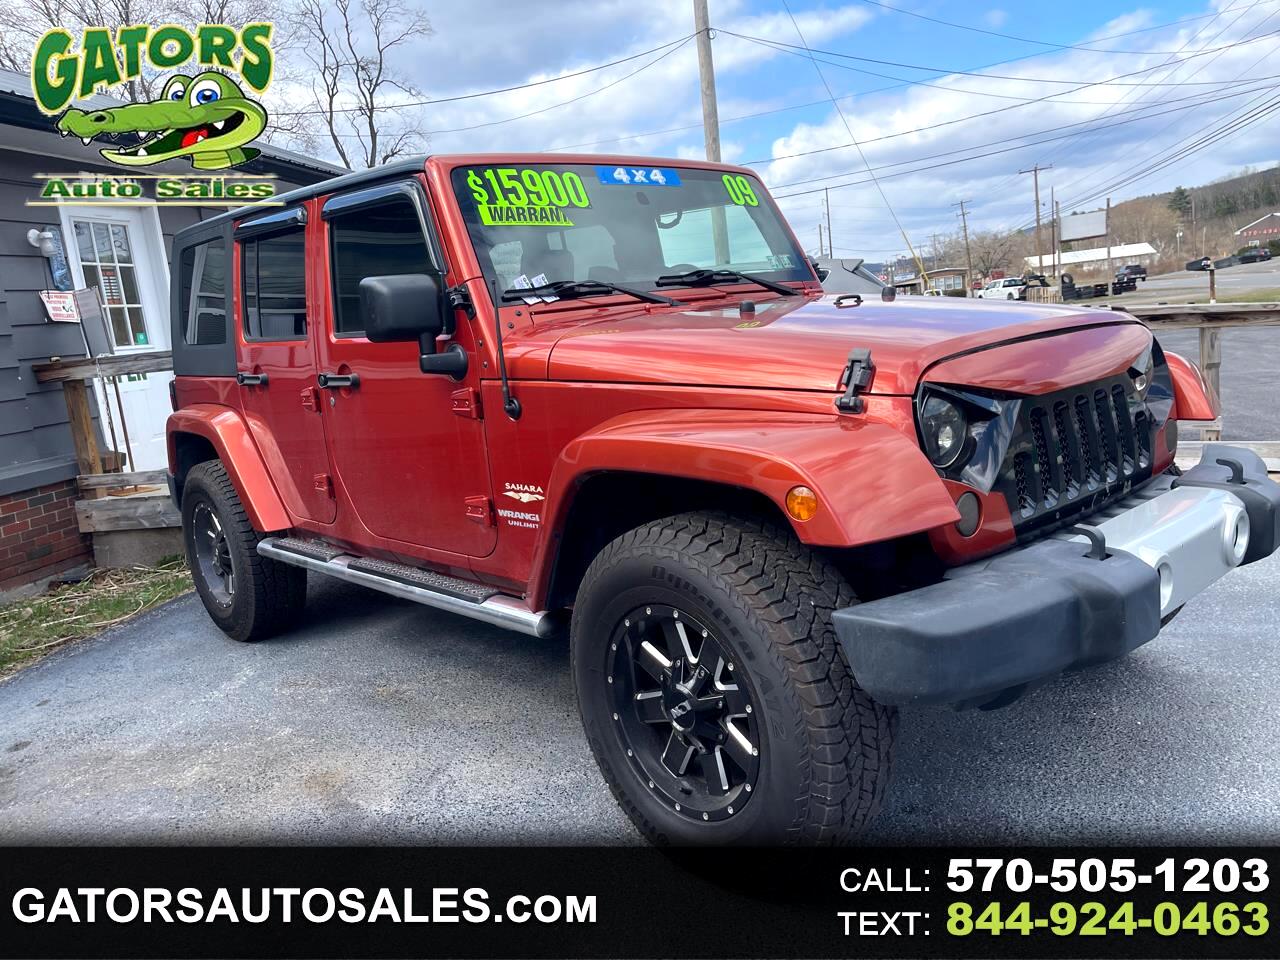 Used 2009 Jeep Wrangler Unlimited Sahara 4WD for Sale in Williamsport PA  17701 Gators Auto Sales